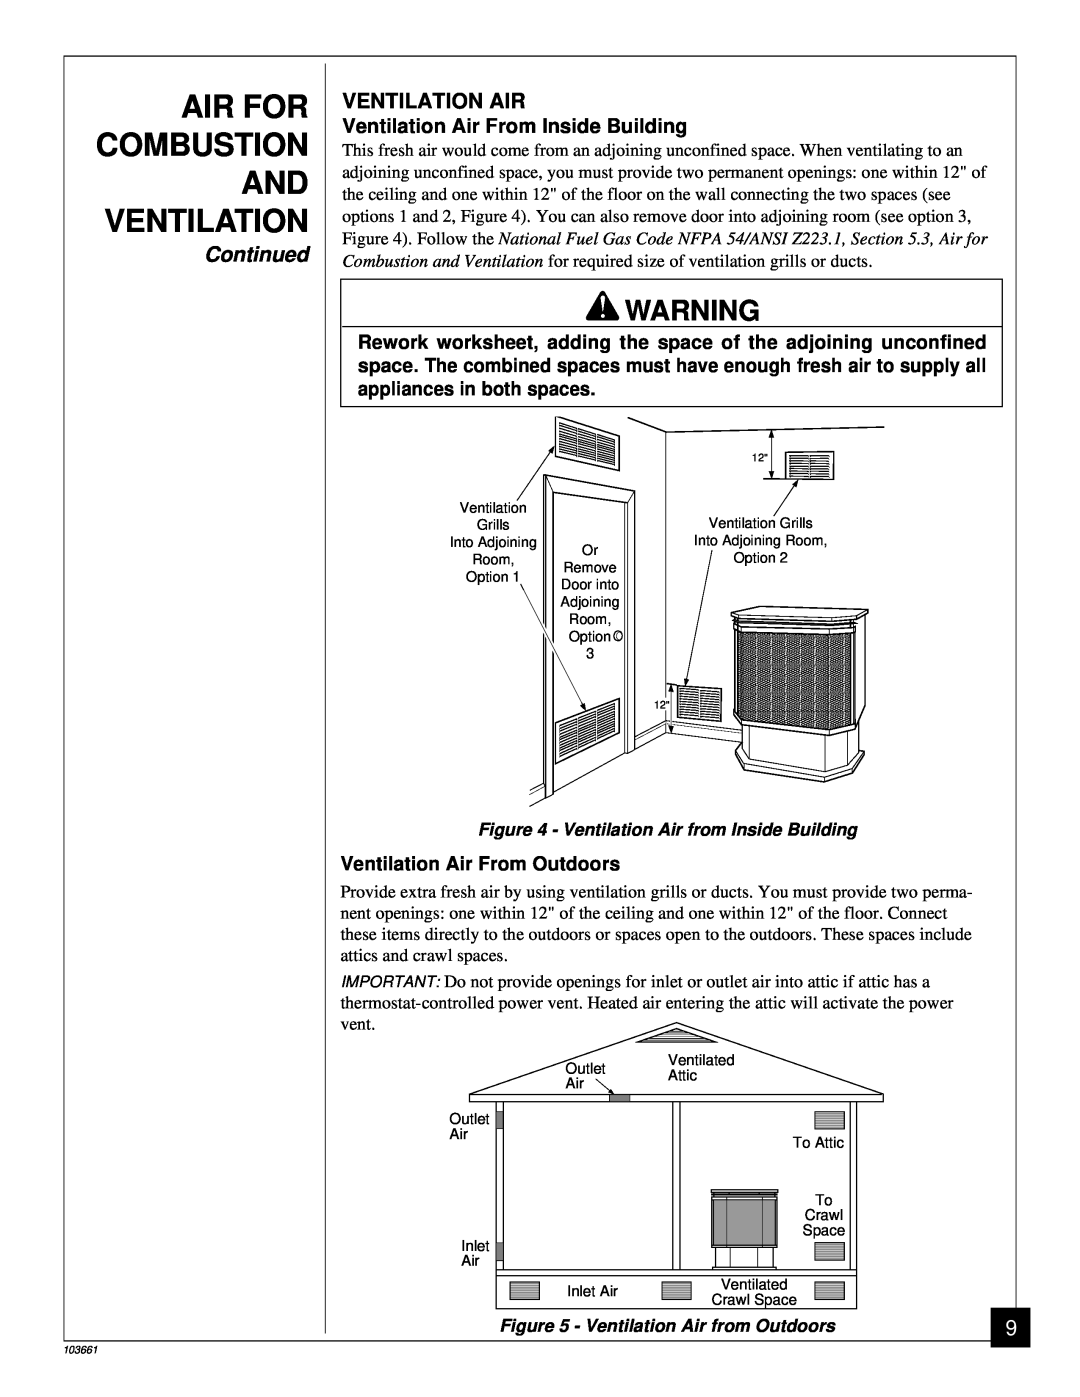 Vanguard Managed Solutions SVFBC installation manual Air For Combustion And Ventilation, Continued, Ventilation Air 